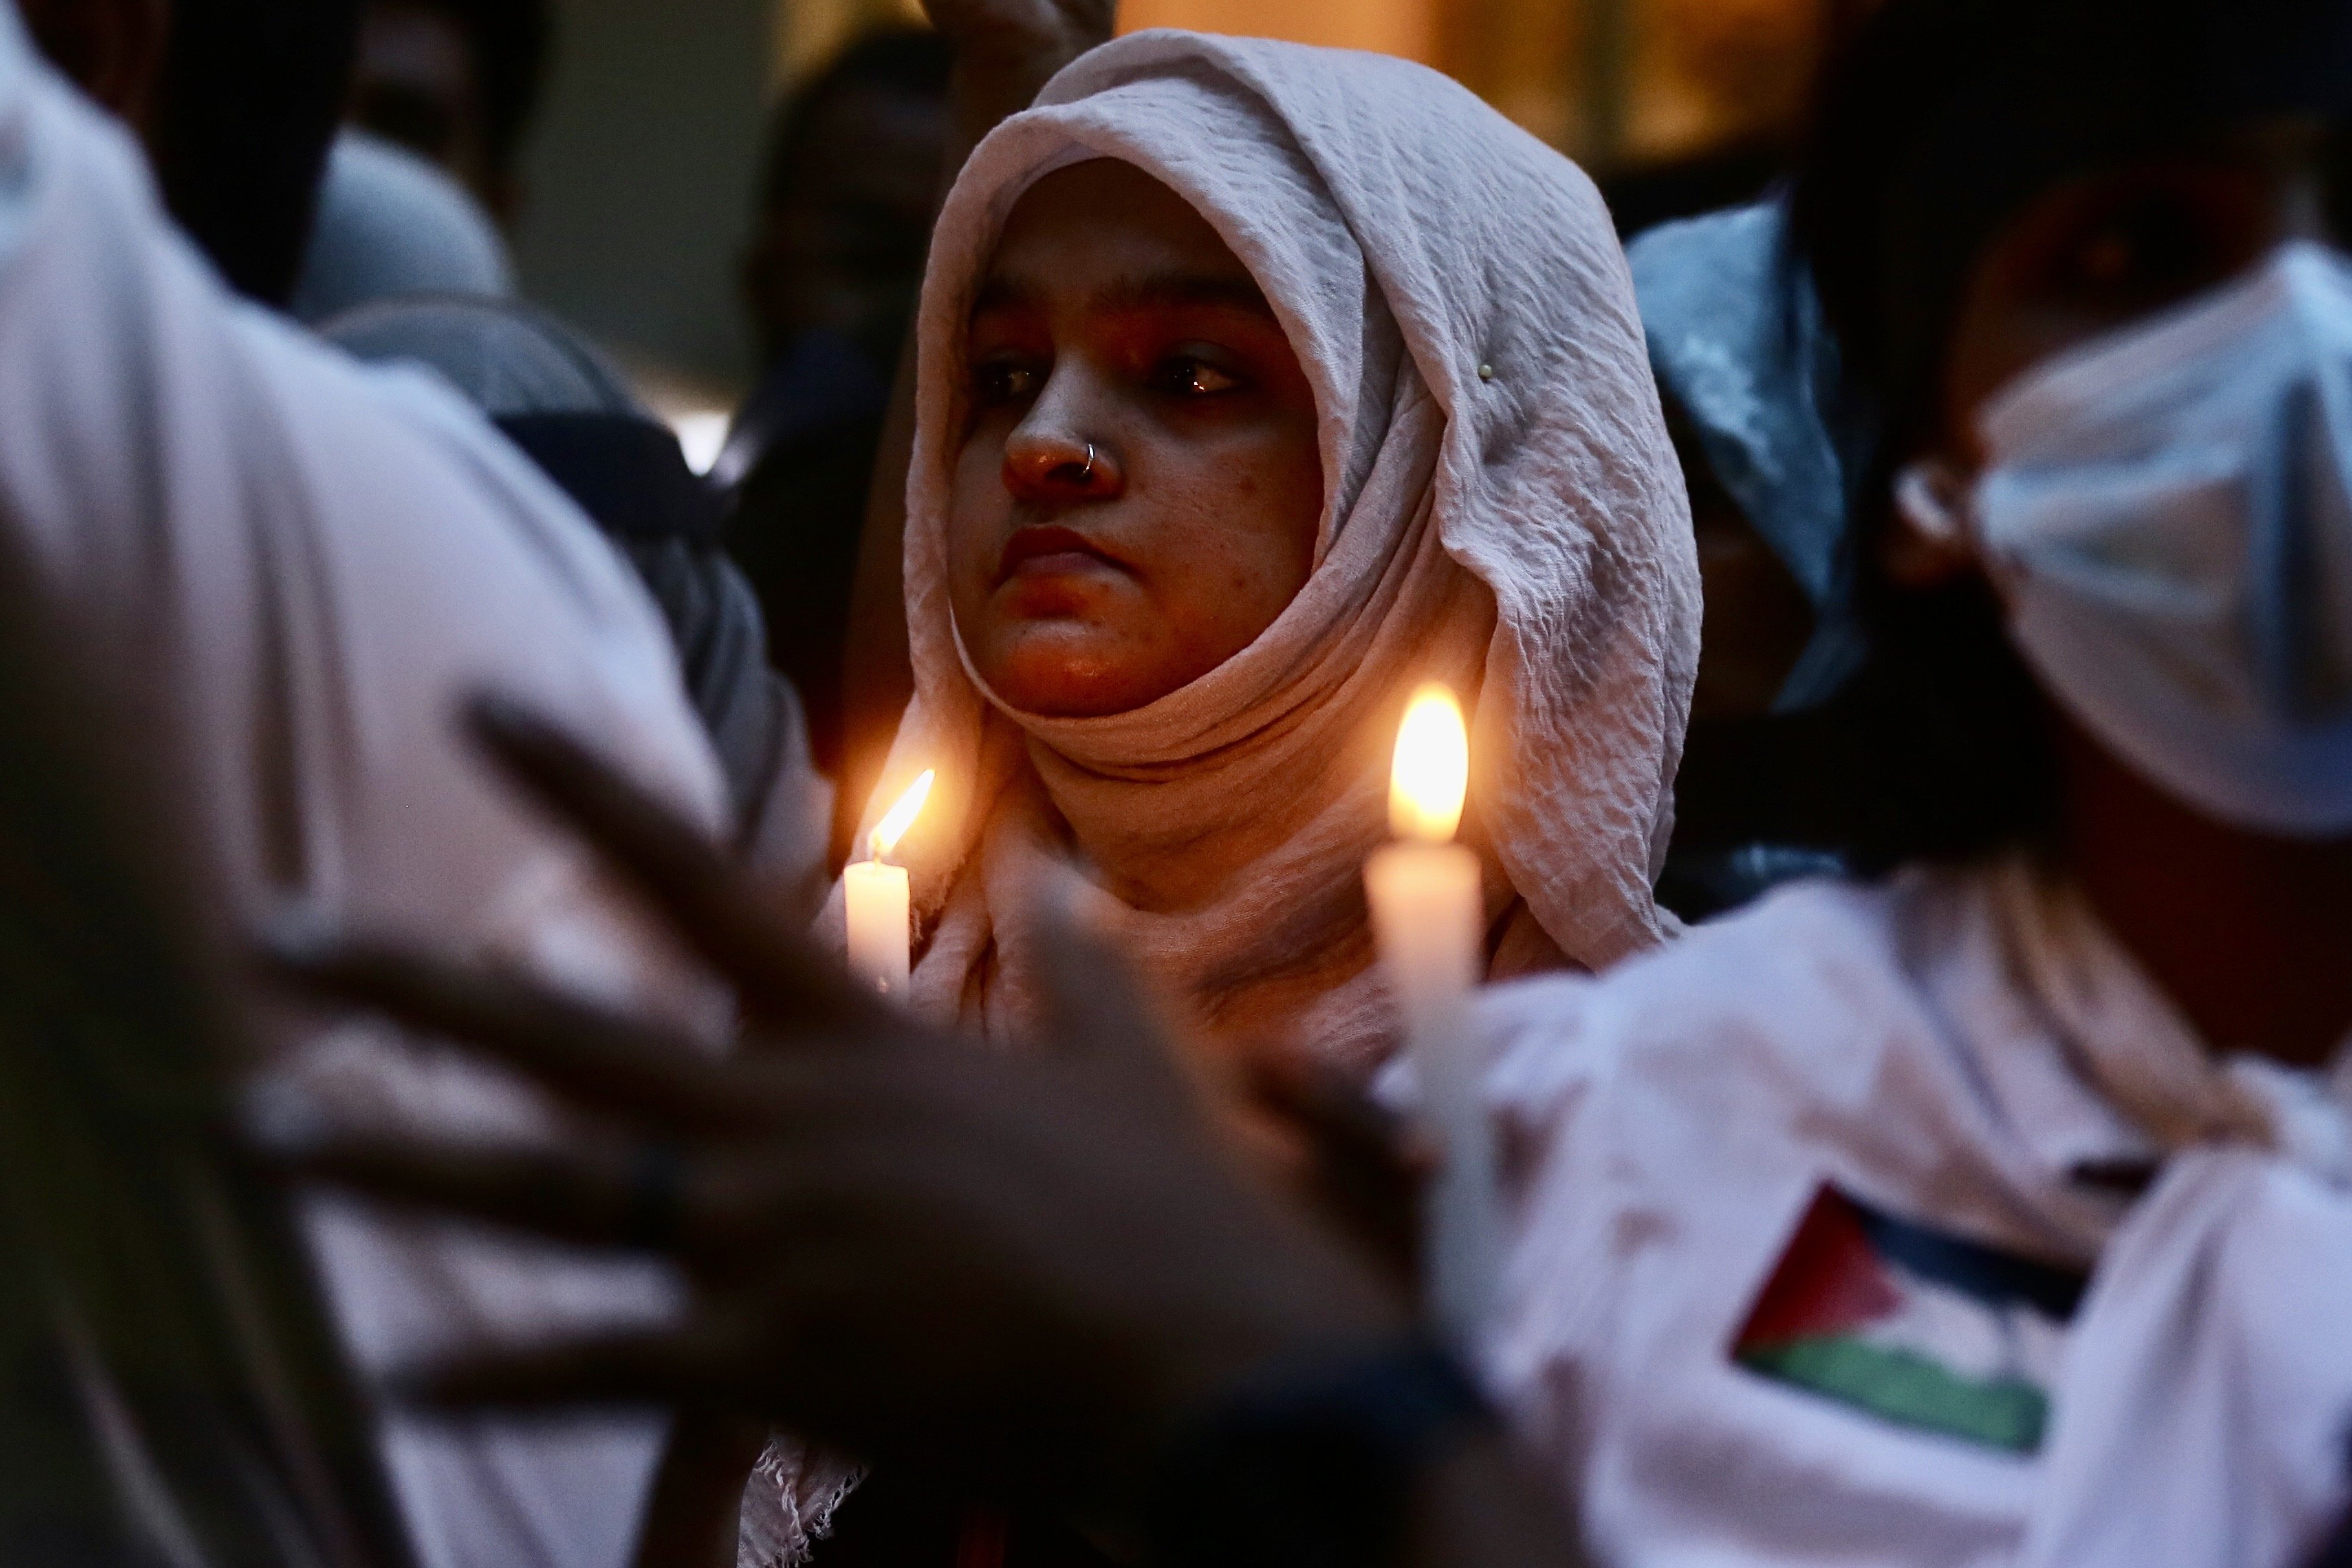 In India, social activists, students and pro-Palestine activists hold a silent anti-Israel protest in Bangalore on October 16. Despite the Biden administration calling on the world to stand by its ally Israel, many in the Global South have criticised the Jewish state. Photo: EPA-EFE